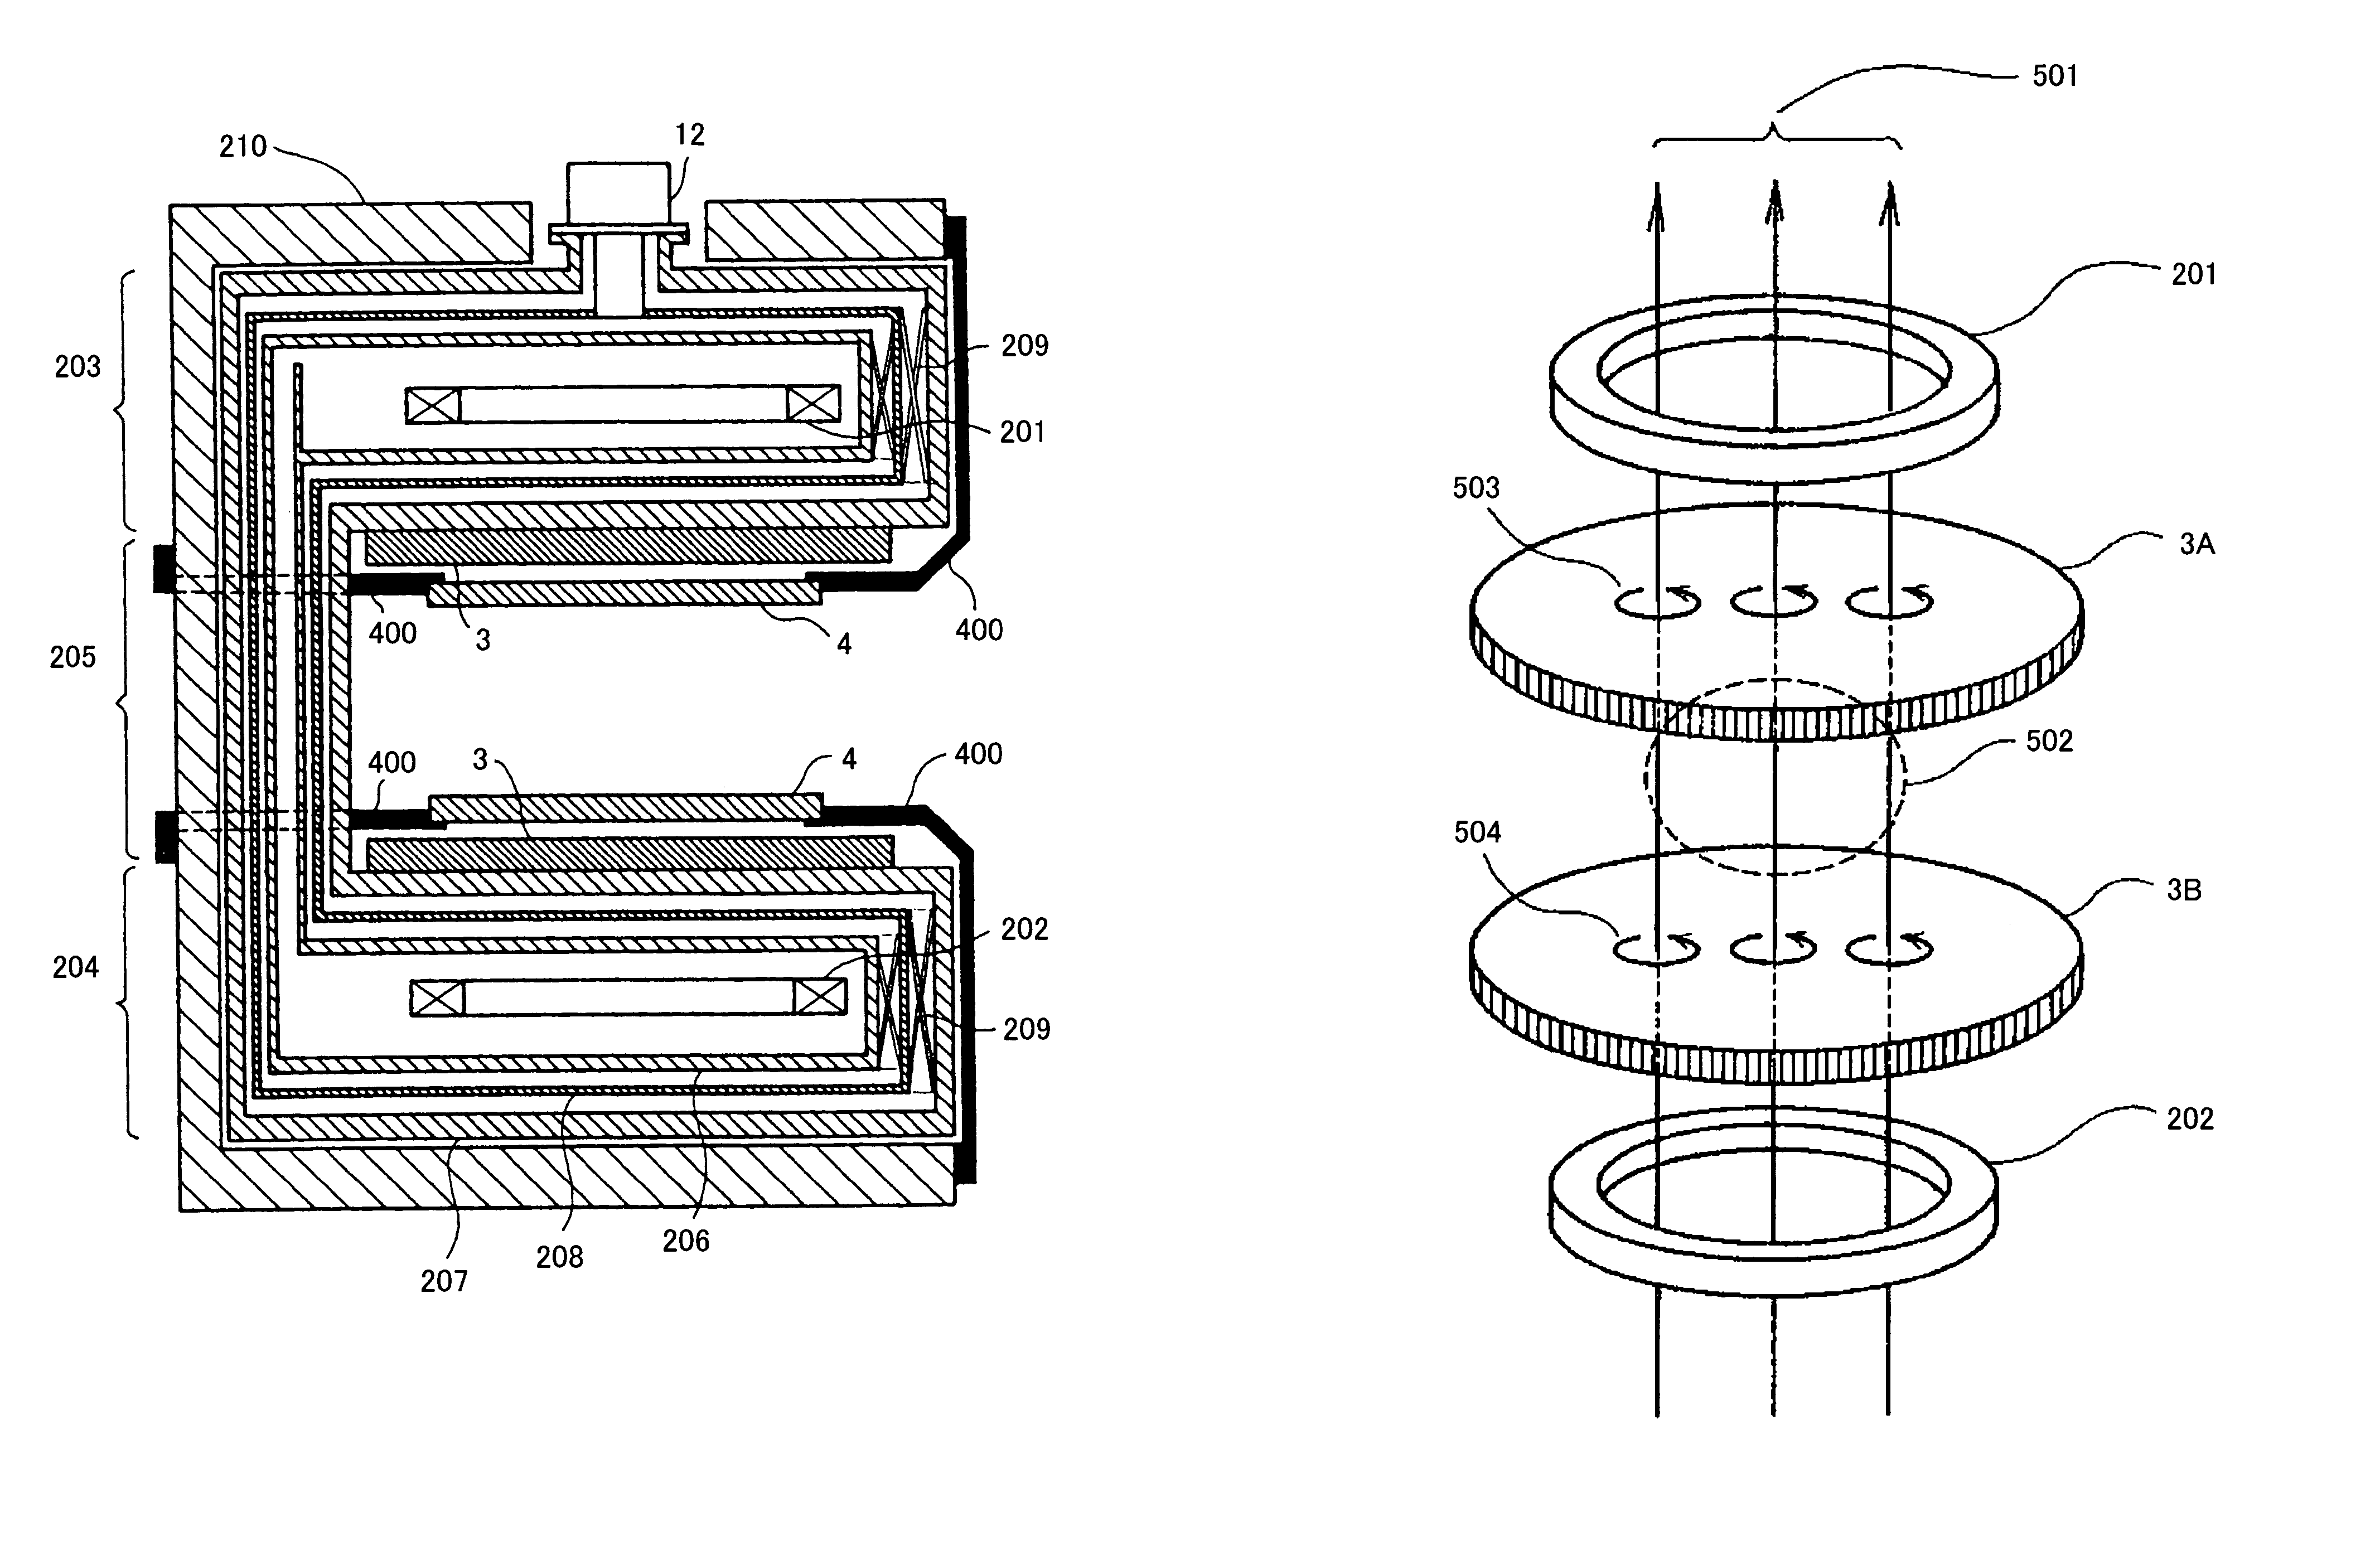 MRI apparatus correcting vibratory static magnetic field fluctuations, by utilizing the static magnetic fluctuation itself